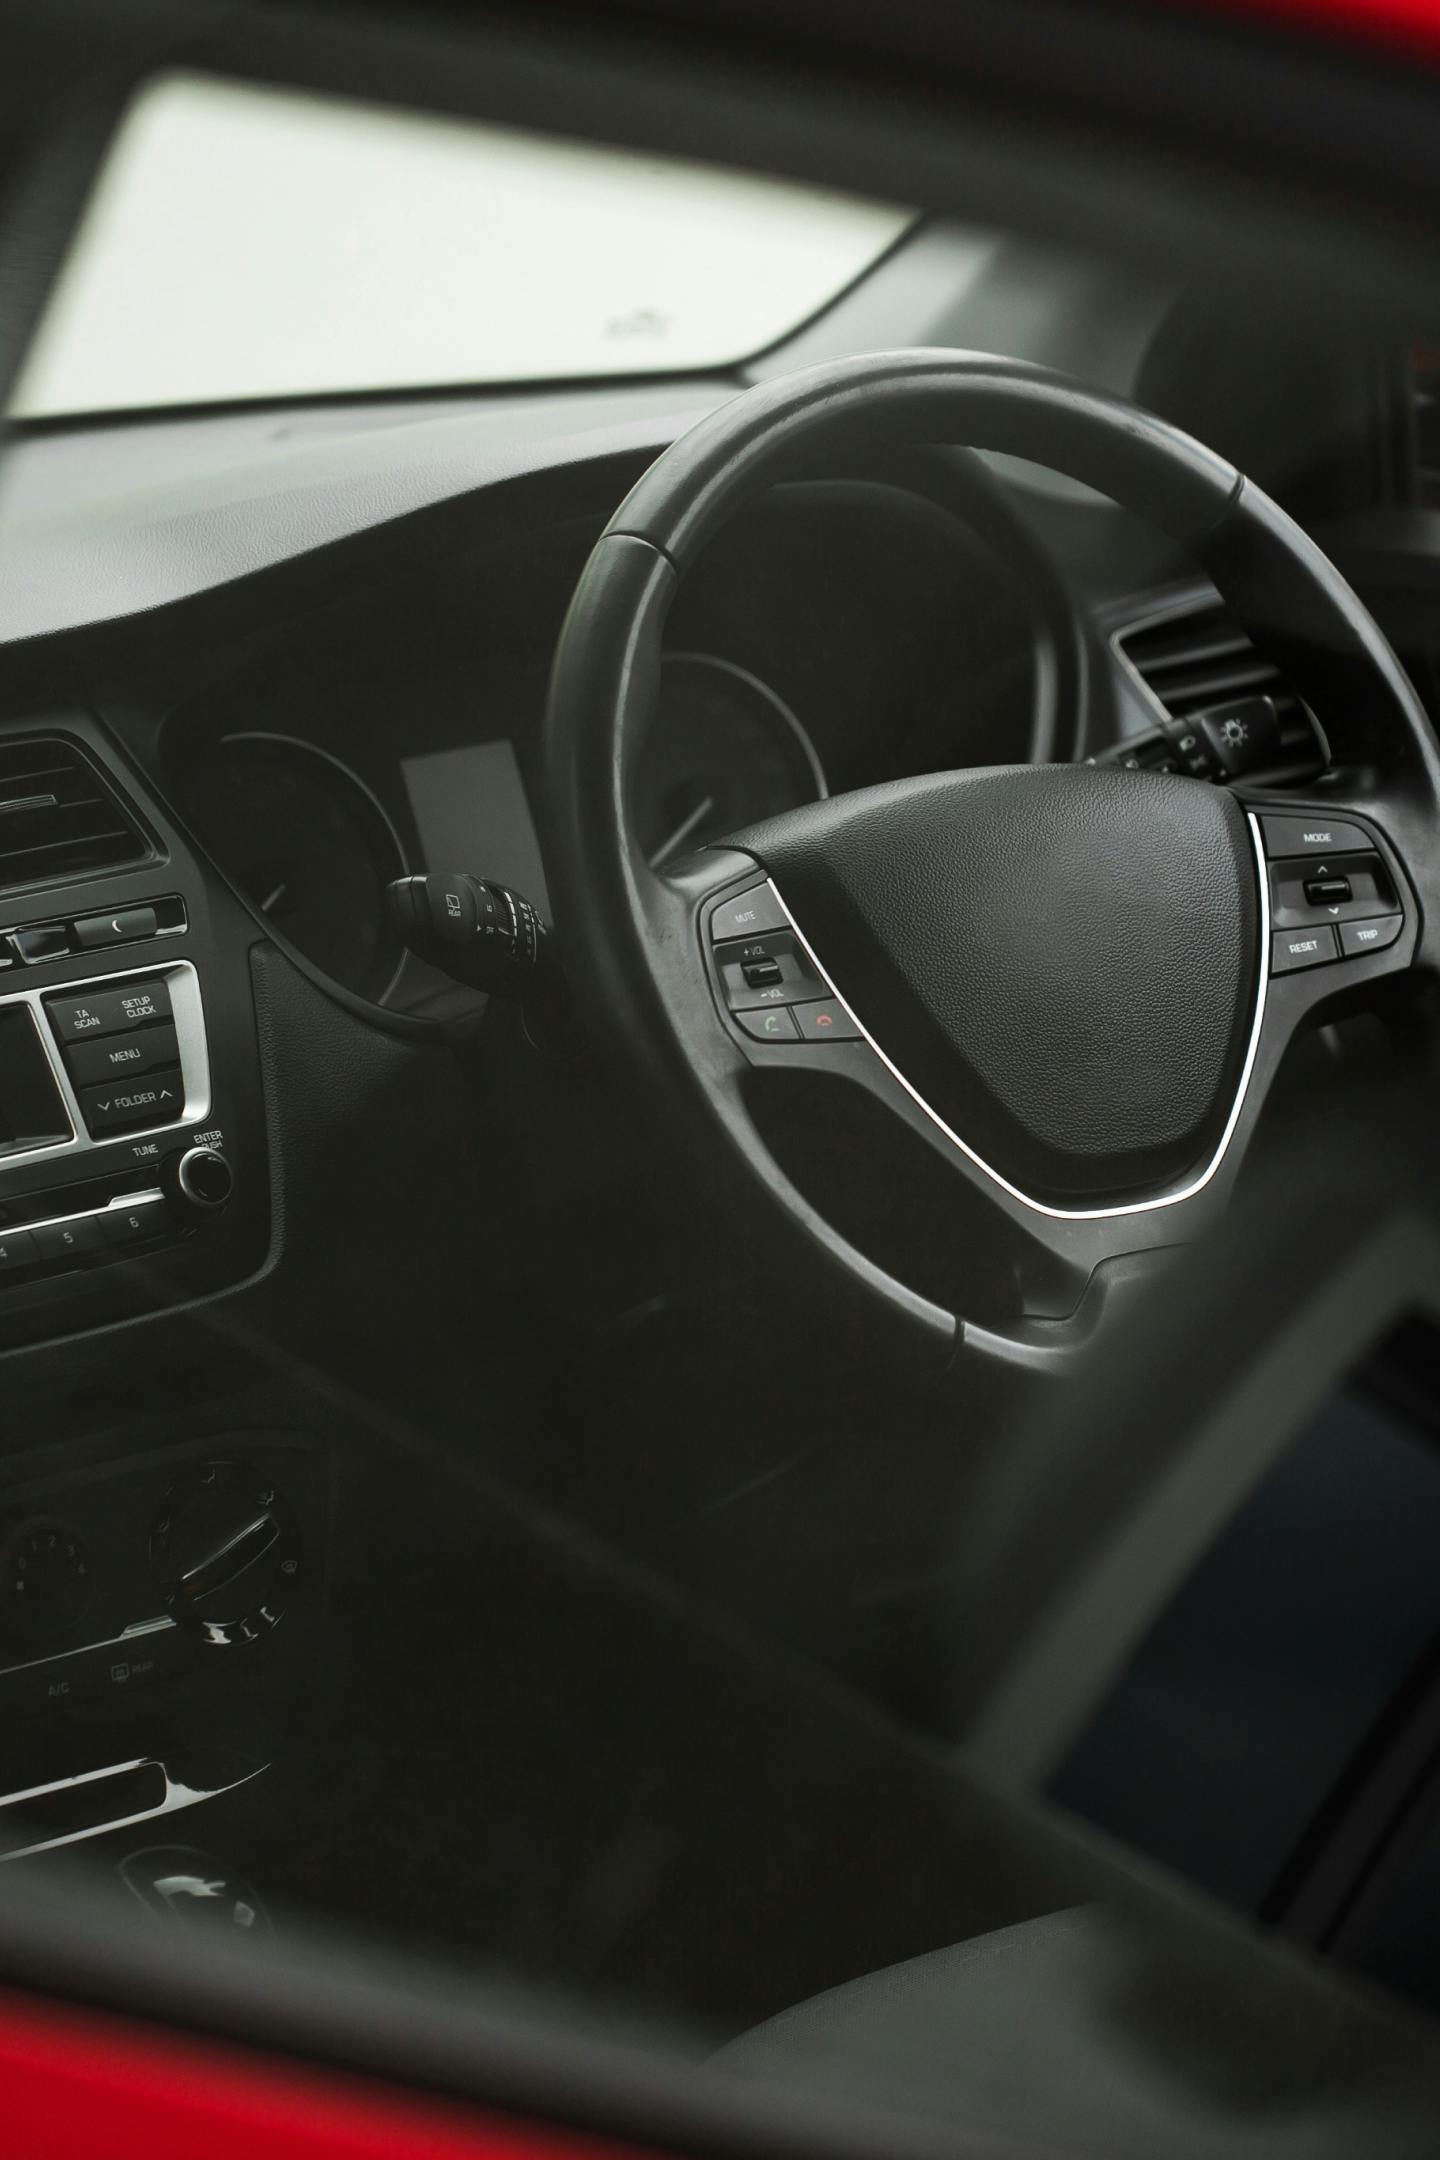 Image of a car interior focusing on the steering wheel